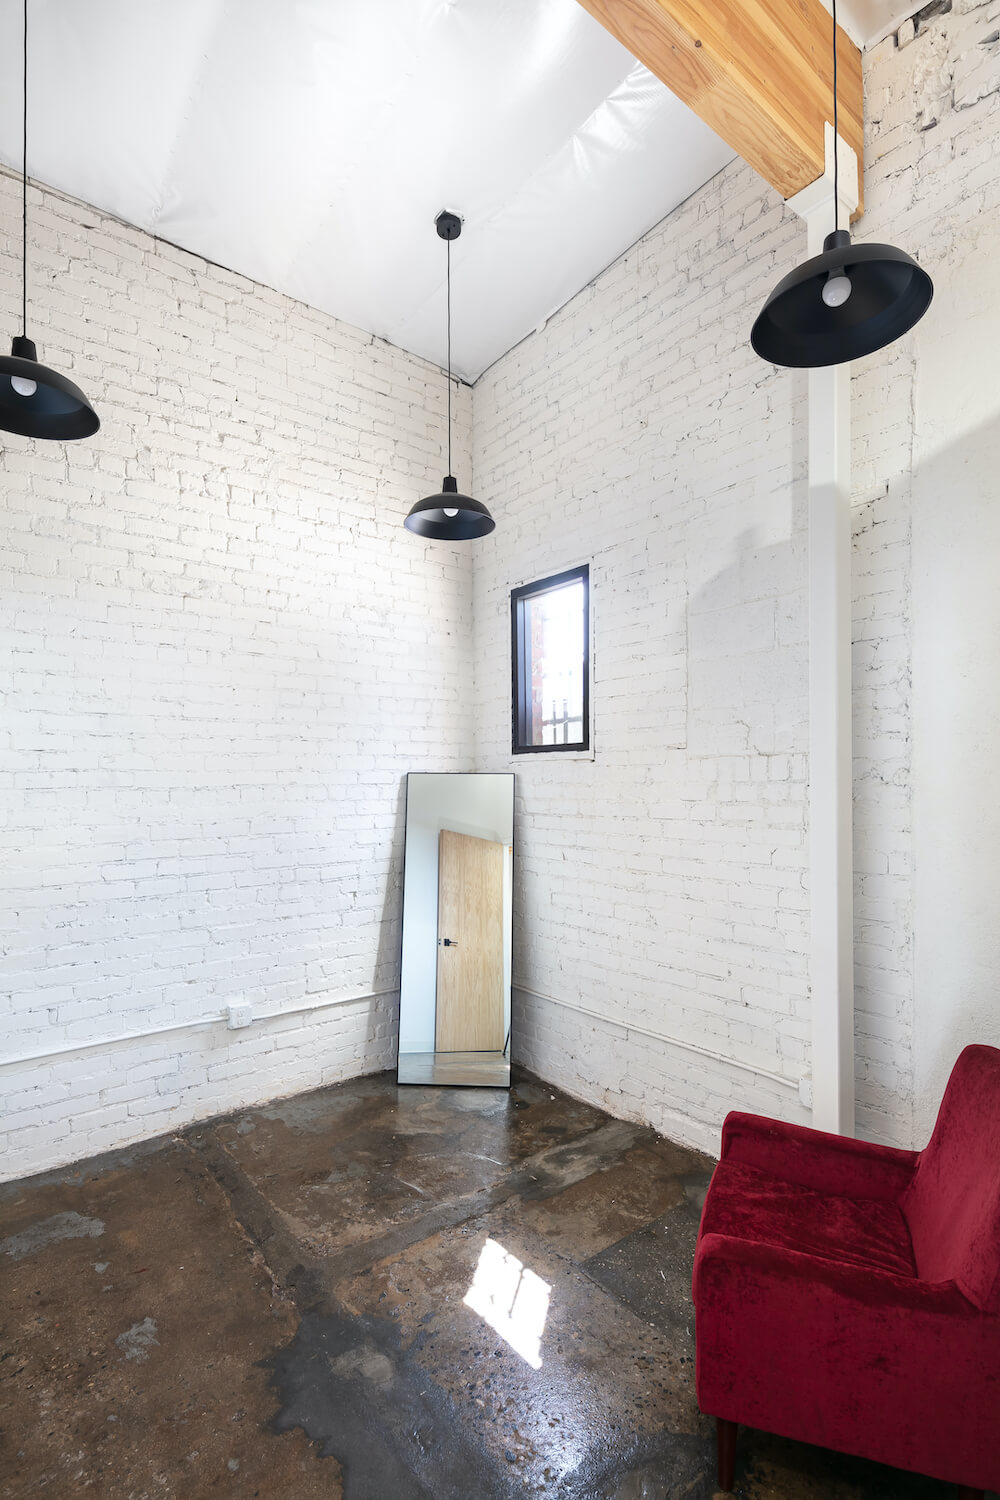 Room with painted brick and hanging black lamps